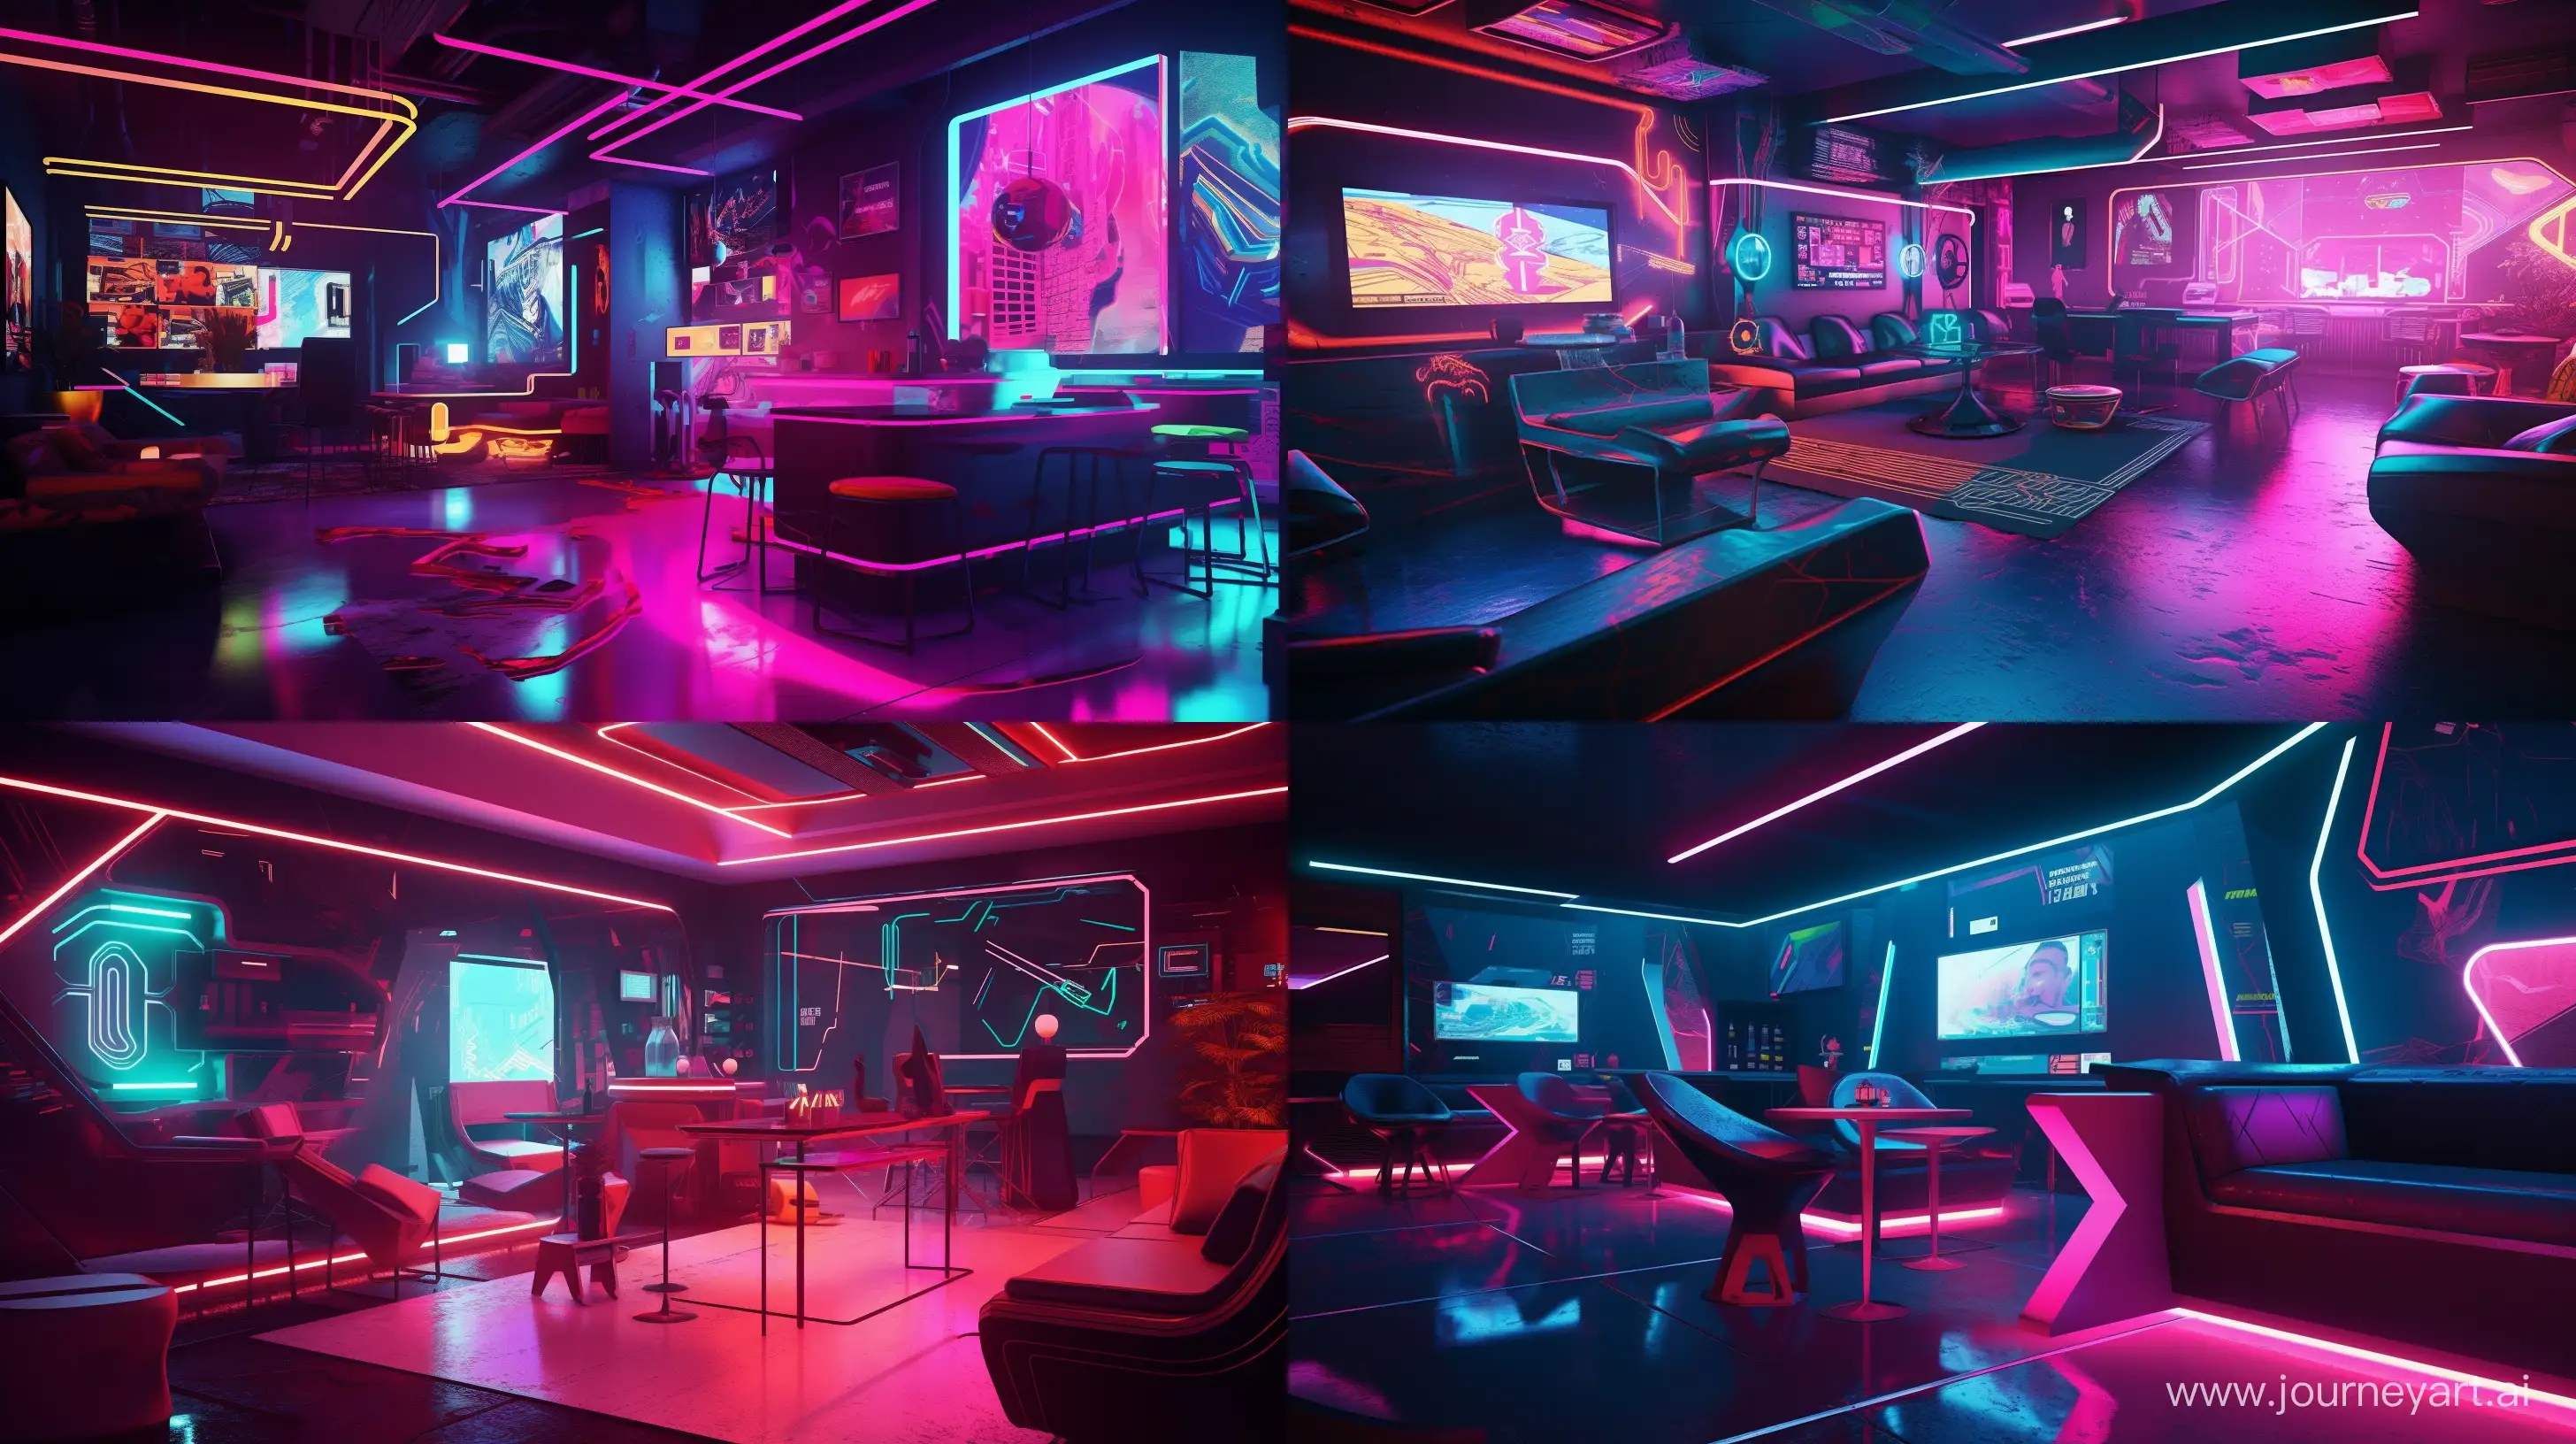 /imagine prompt: A sleek, futuristic interior with "RapiDwm" displayed prominently in neon colors. The dark background is adorned with glowing neon lights, casting a vibrant and colorful glow across the space. The image is rendered with a cyberpunk aesthetic, featuring bold outlines and exaggerated forms that capture the dynamic energy of the scene. The mood is one of modernity and innovation, with the neon colors adding a sense of excitement and cutting-edge style to the overall ambiance. --ar 16:9 --v 5 --q 2